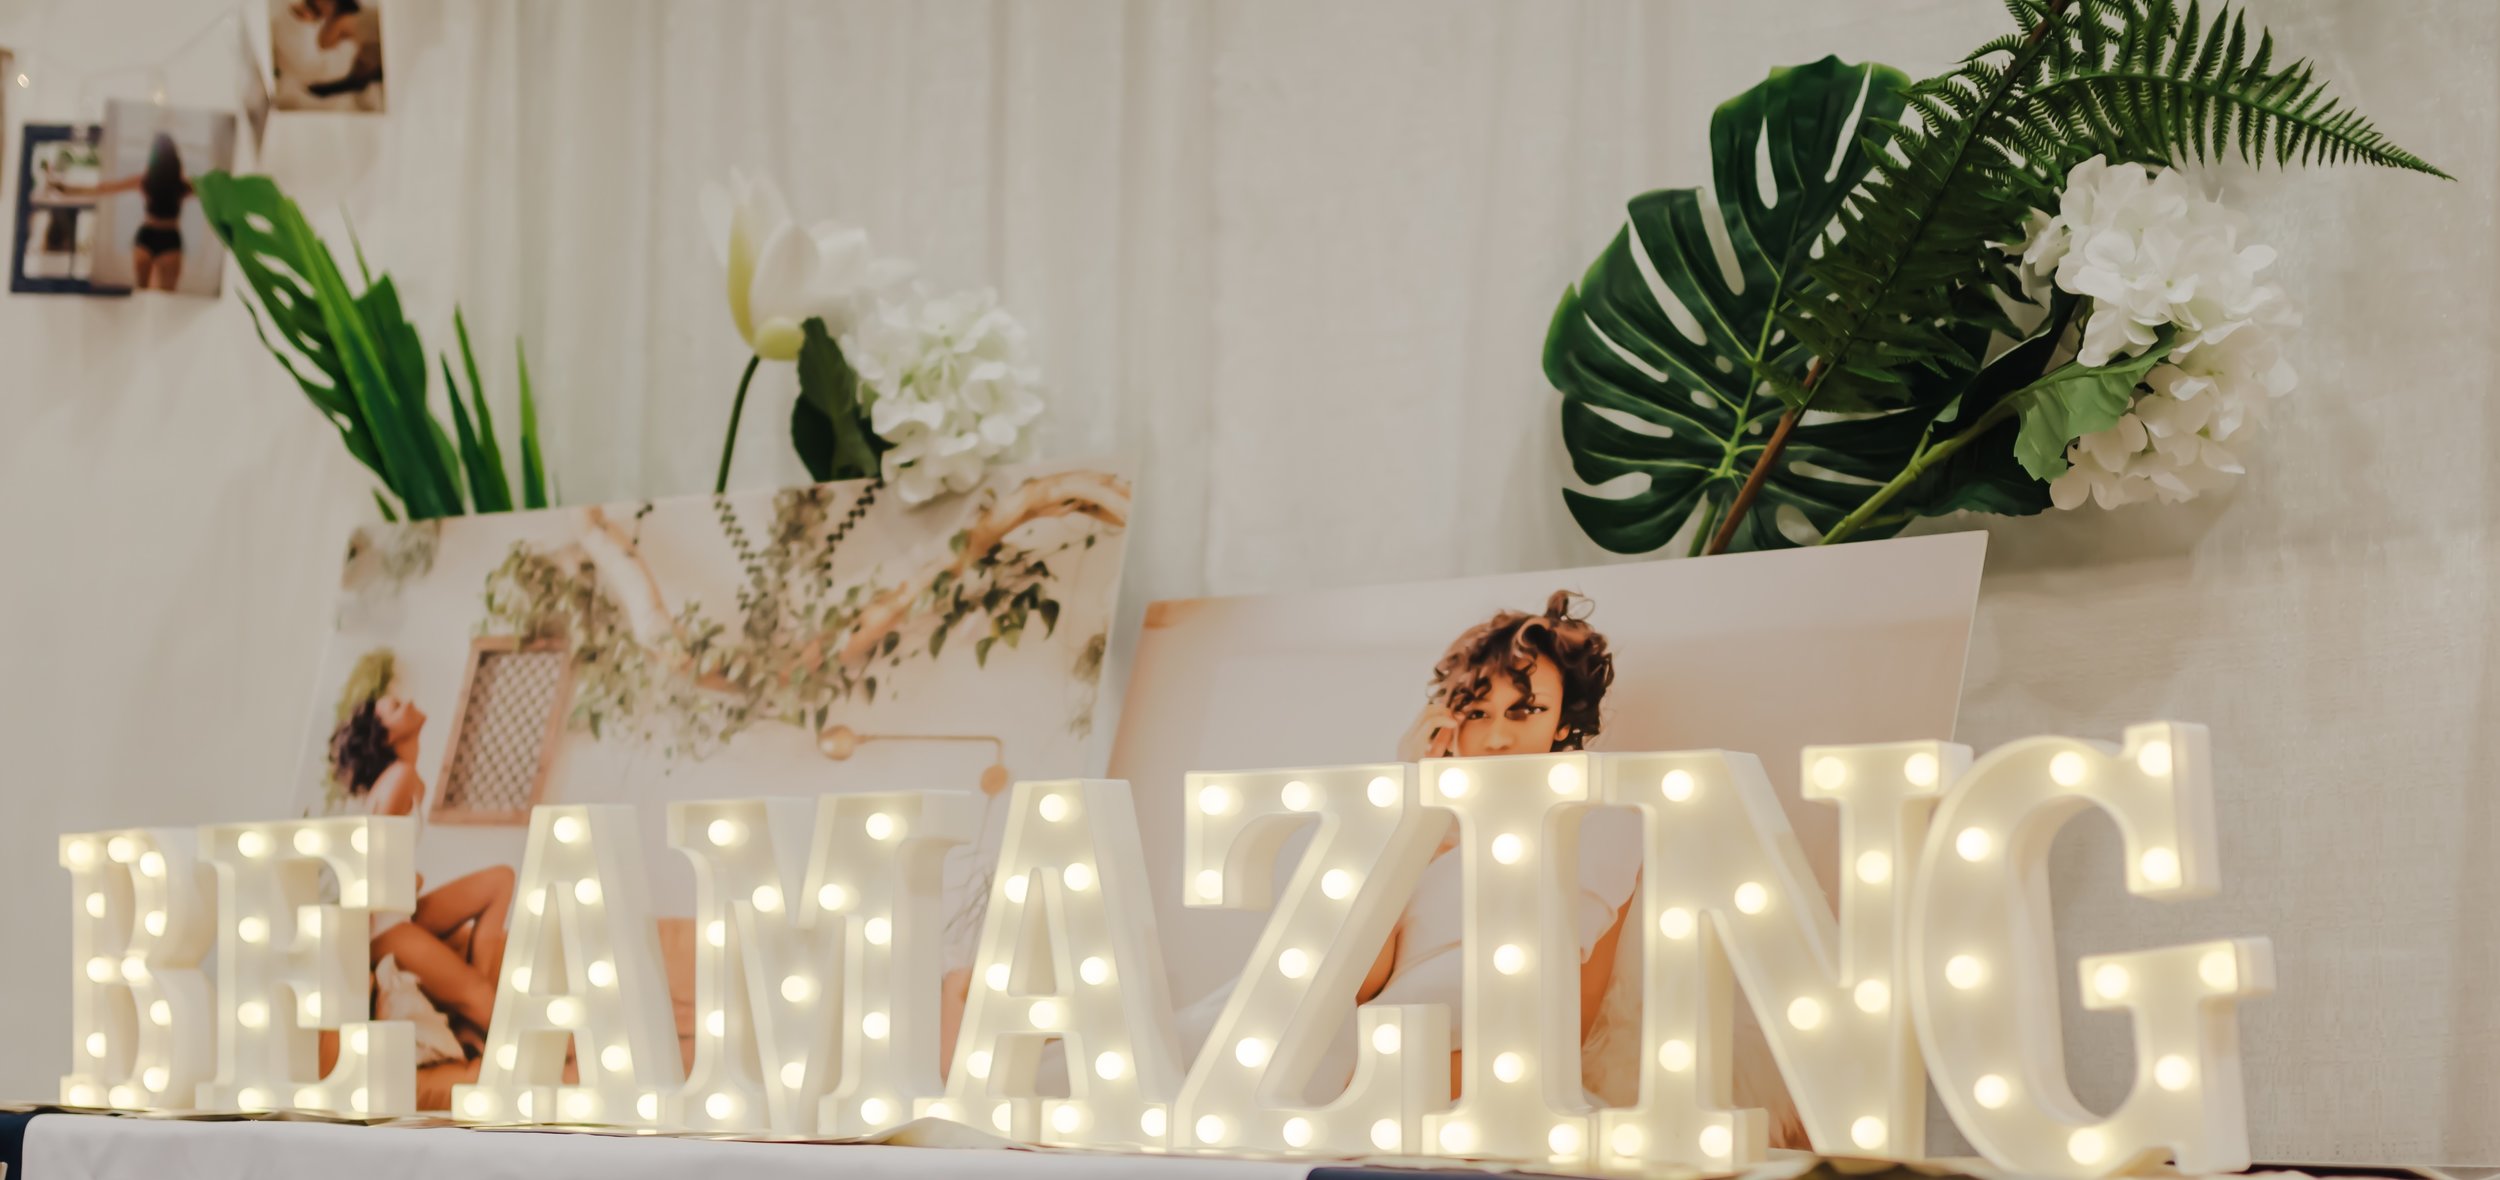 Marquee Letters plants and flowers.jpg